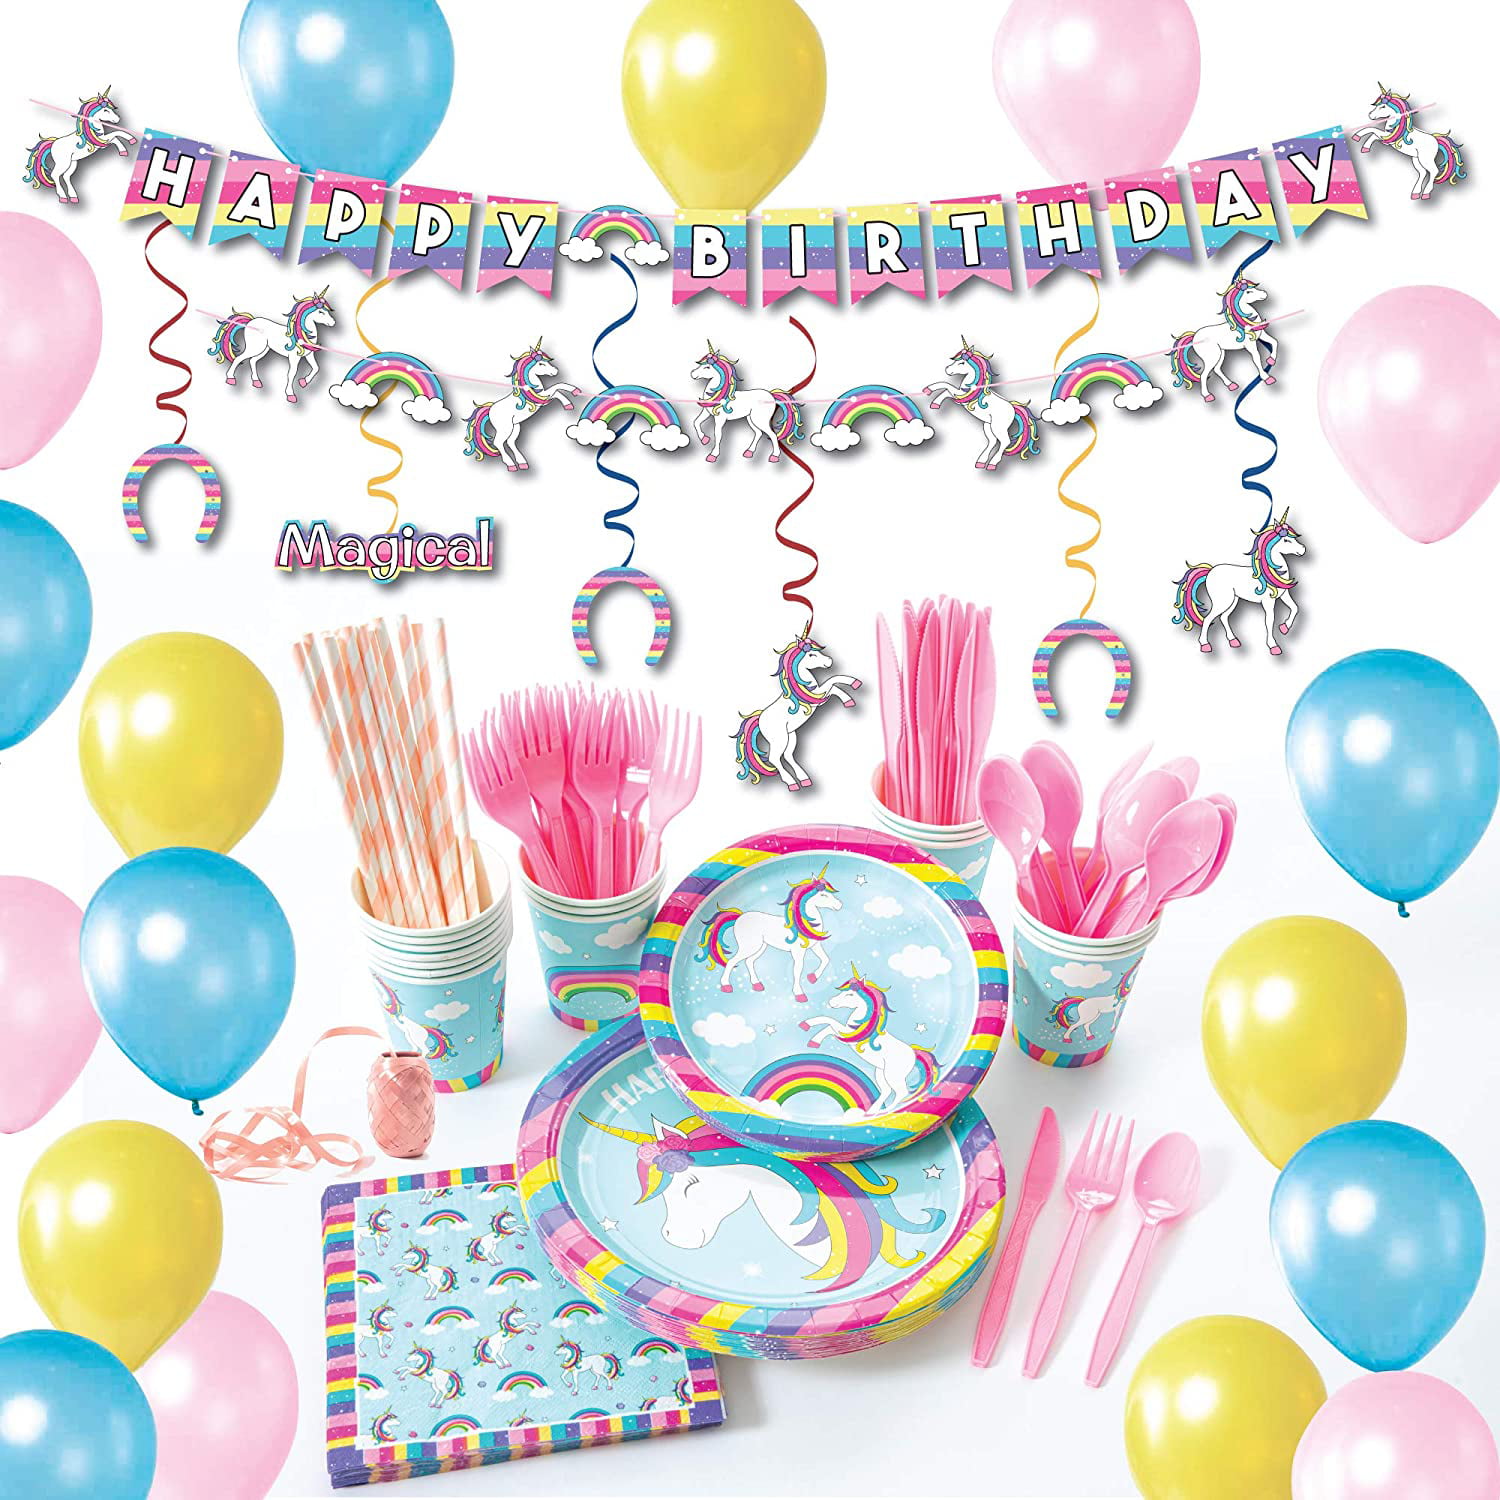 Unicorn party supplies decorations set 176 piece for birthday party-Serves 16 guests-birthday bunting,straws,blowouts whistles,Unicorn headband,pink satin sash for girls,princess girls Party favors 